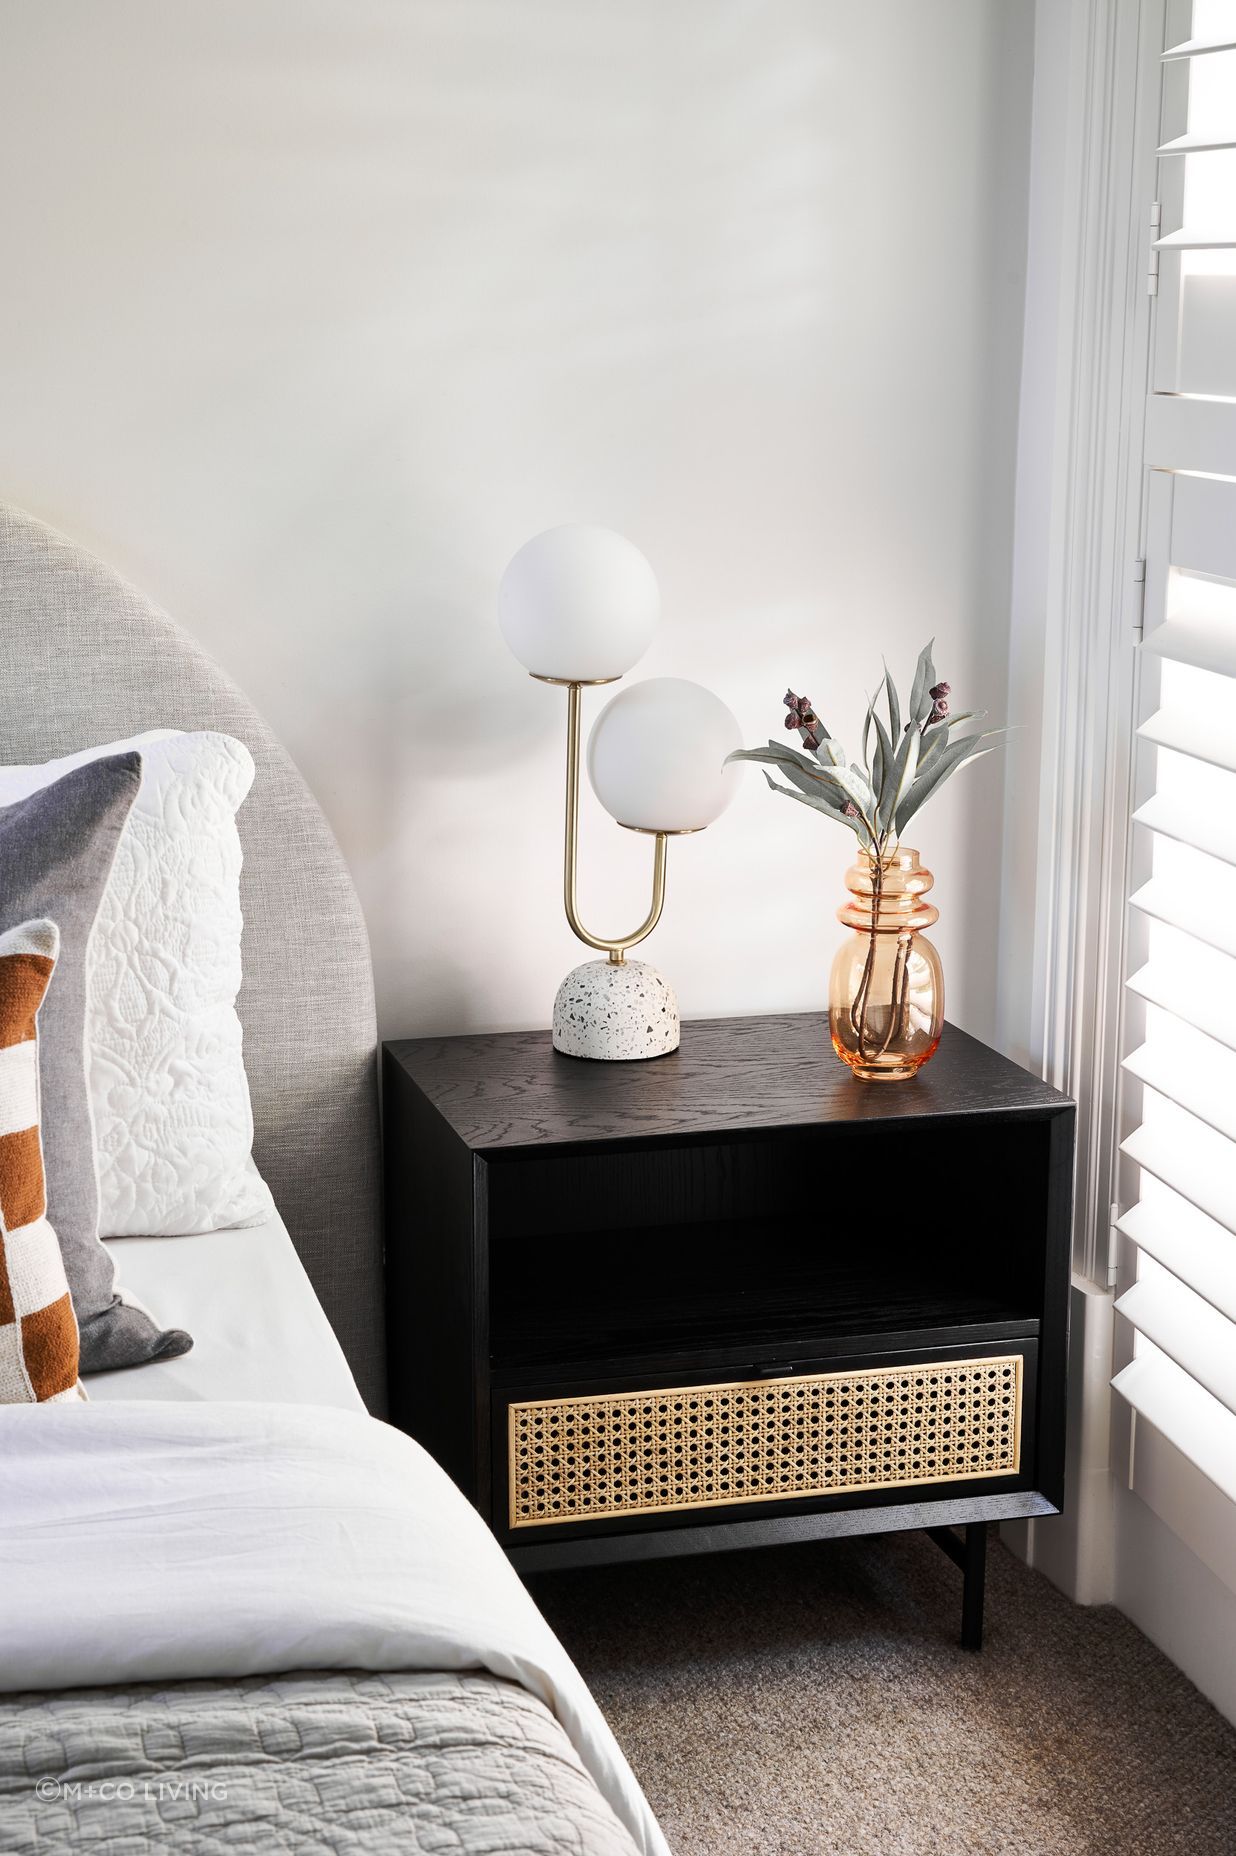 In addition to being used for stand-alone side tables, rattan is often incorporated as a design element in hardwood bedside tables, such as this Betty Side Table.